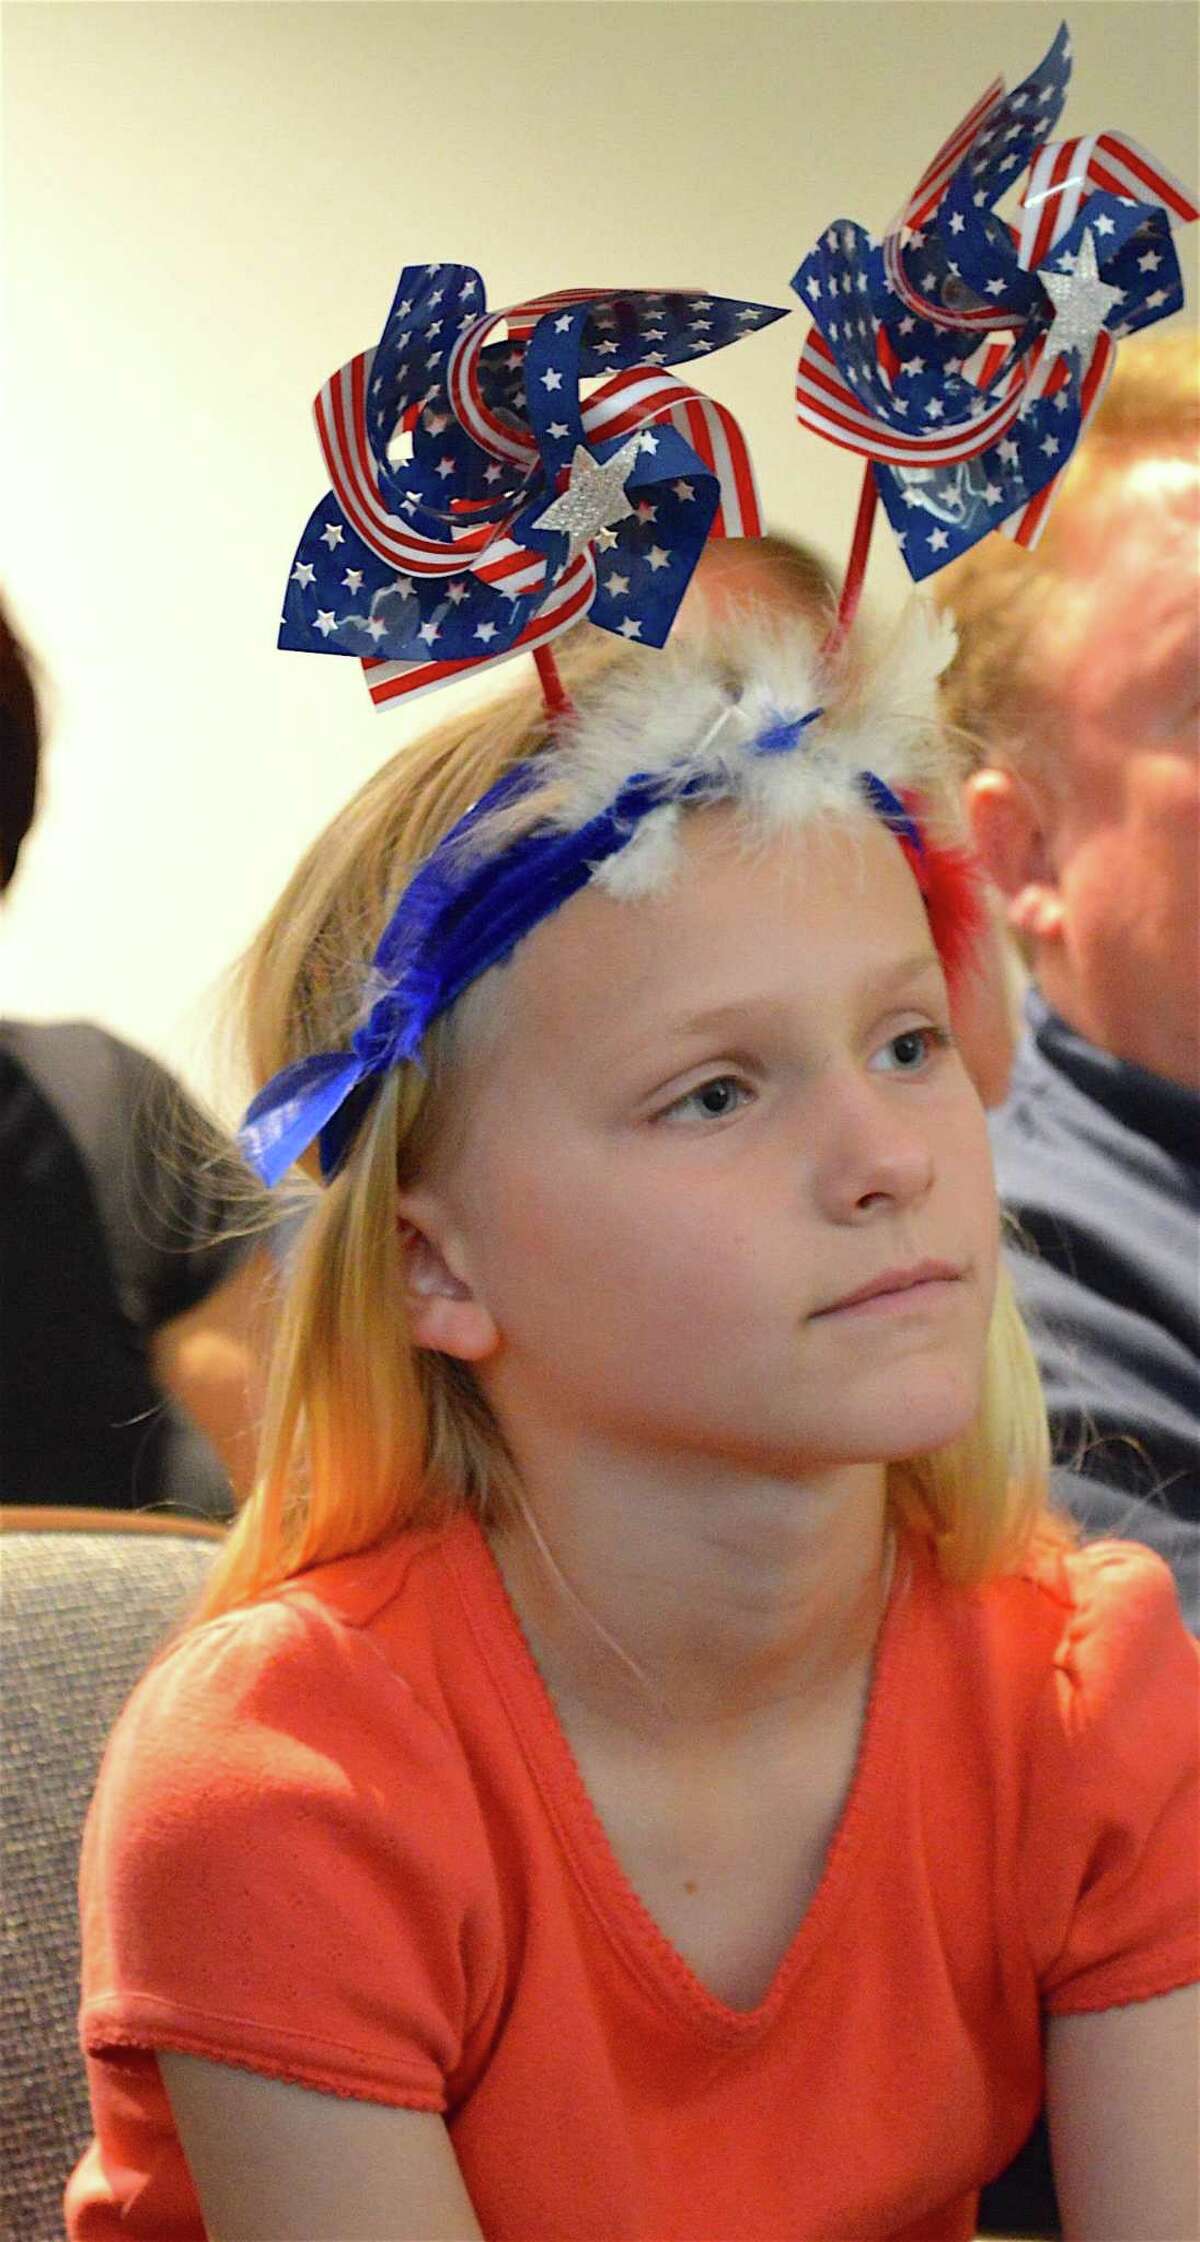 Avery Burnham, 8, of Fairfield observes the ceremony at the Memorial Day celebration in Town Hall, Monday, May 29, 2017, in Westport, Conn.